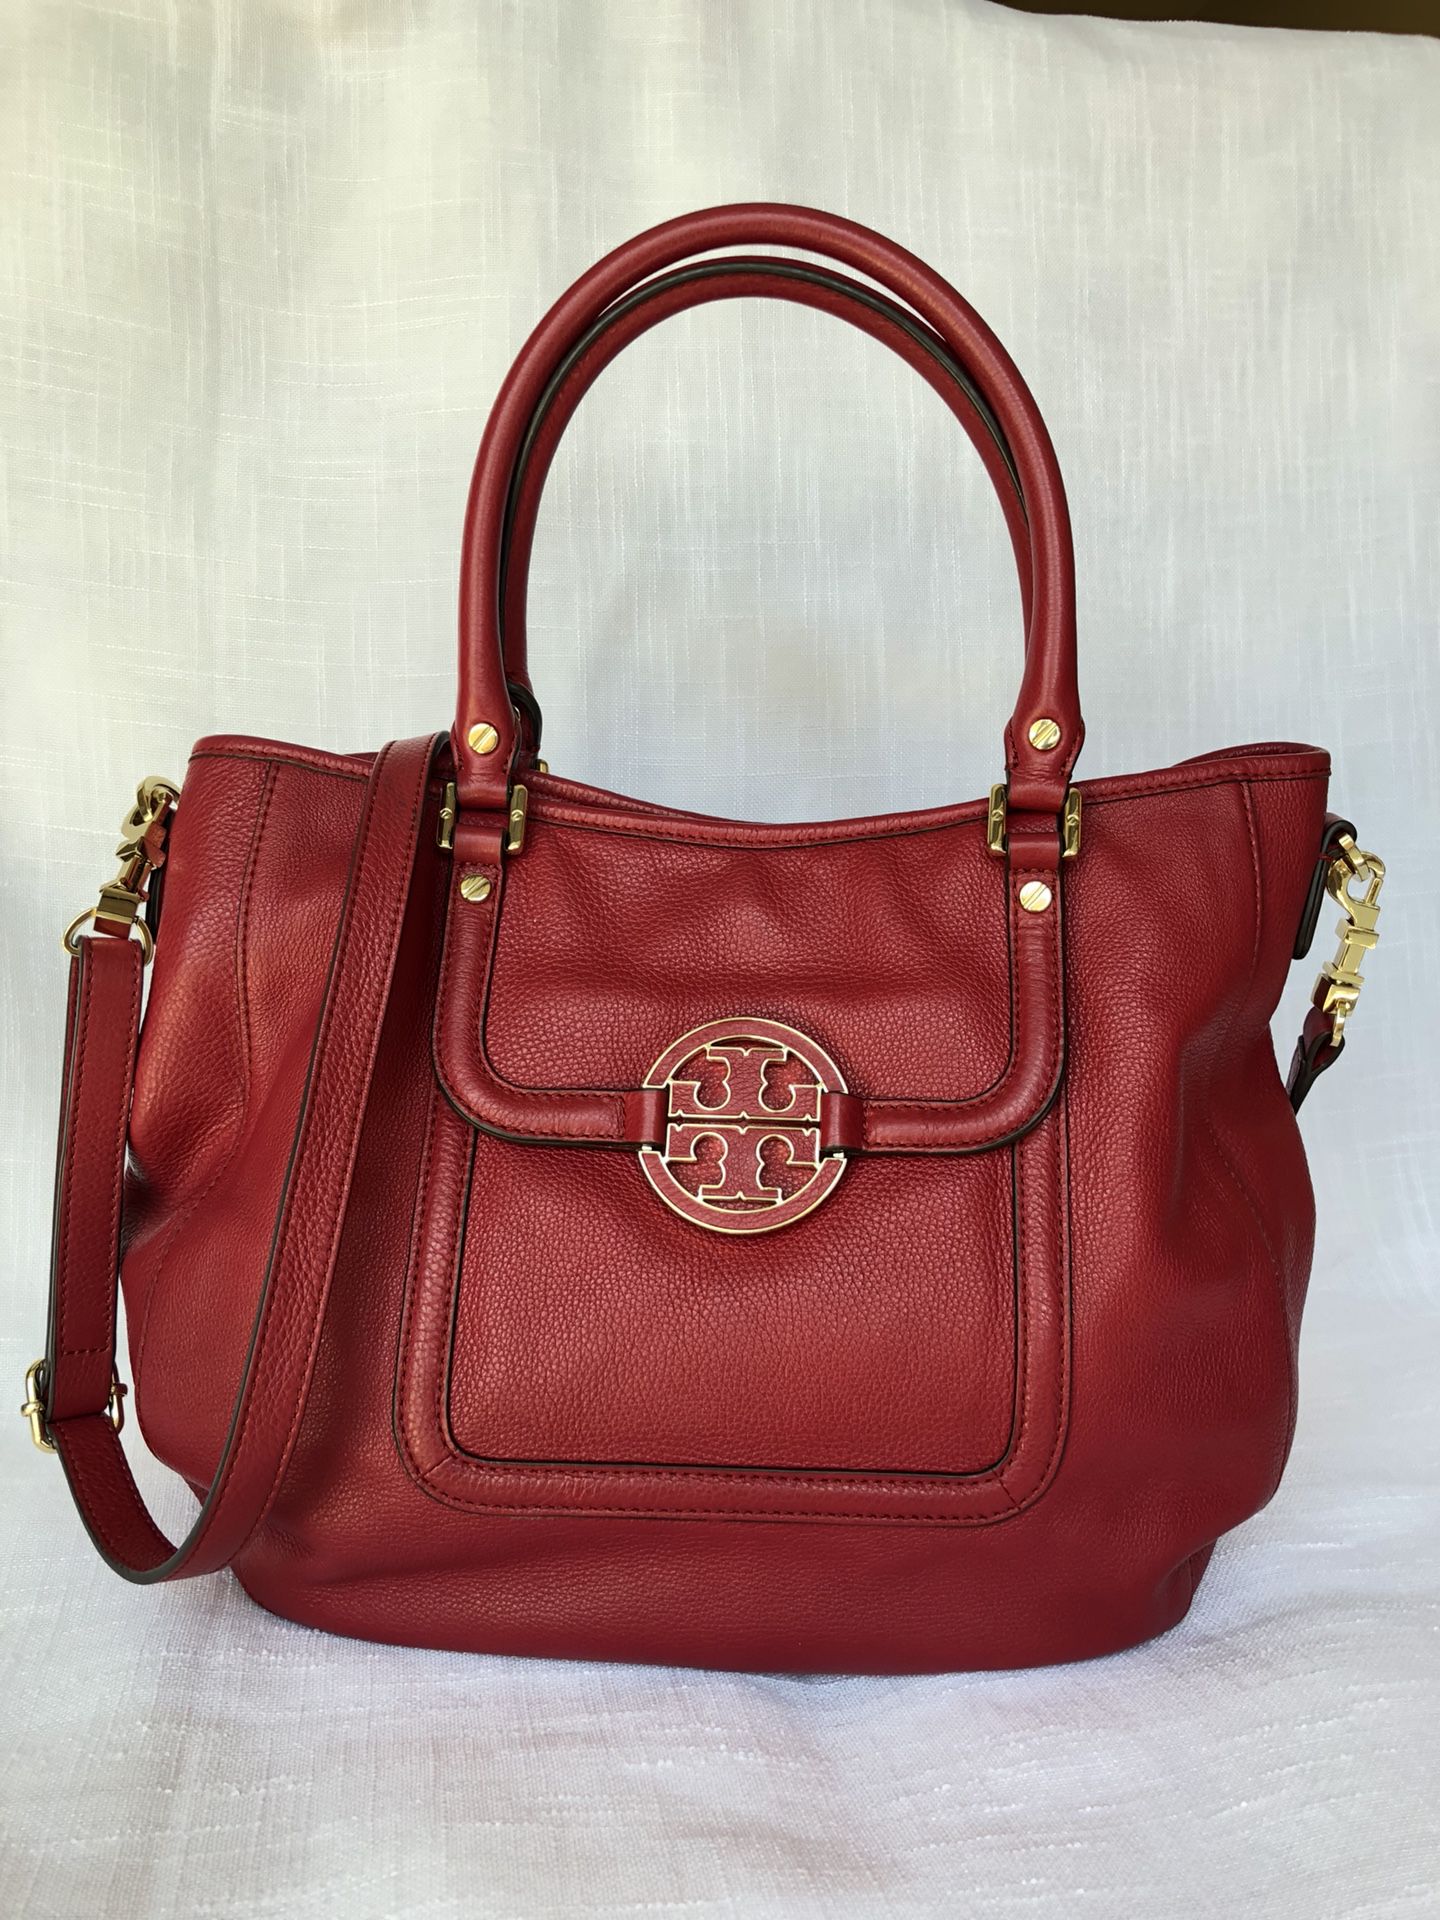 Tory Burch Amanda Classic Handle Red Hobo Bag for Sale in Cypress, CA -  OfferUp